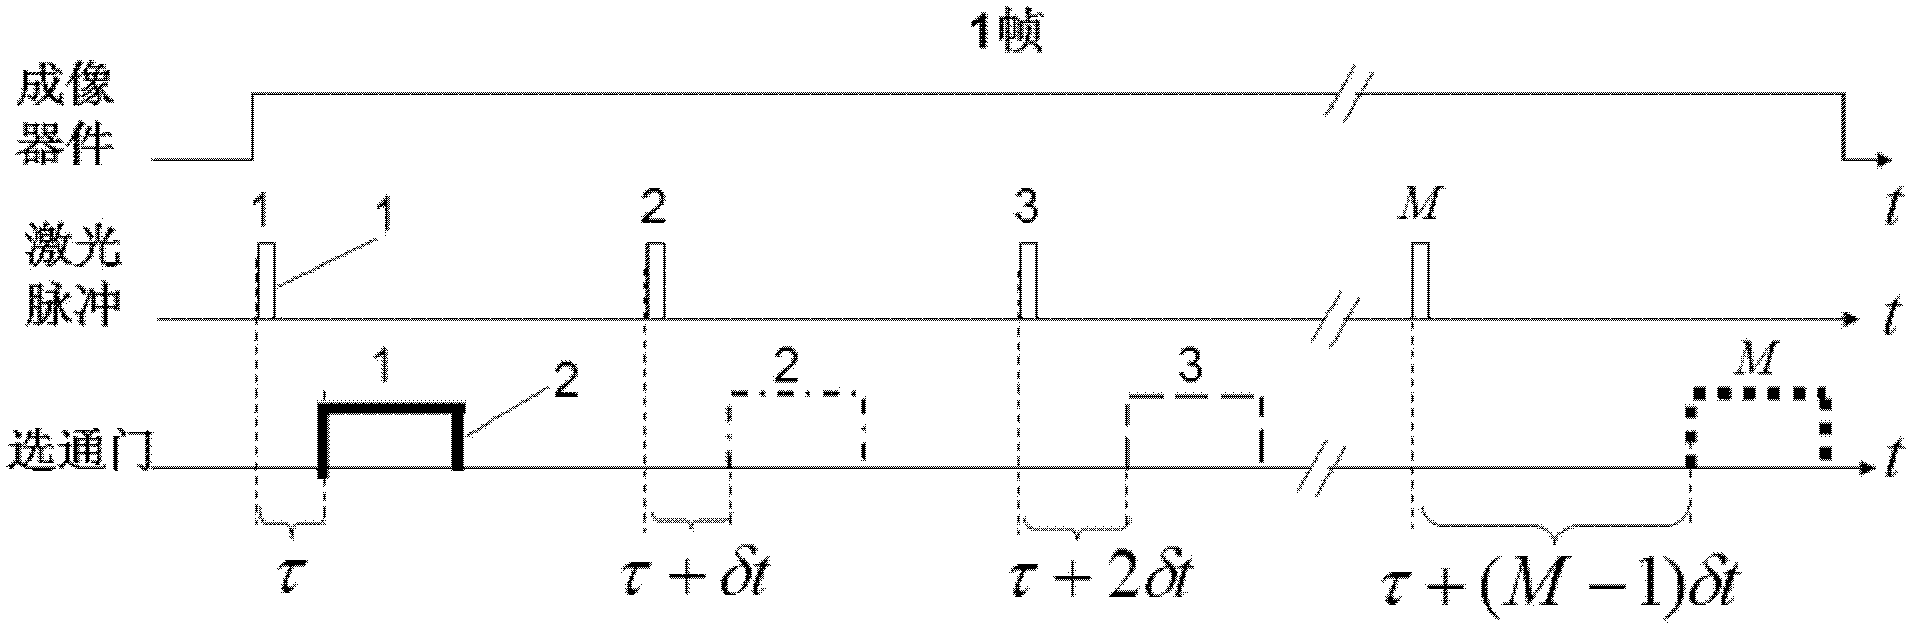 Multi-pulse delay integral shaping method capable of achieving range gating space energy envelope